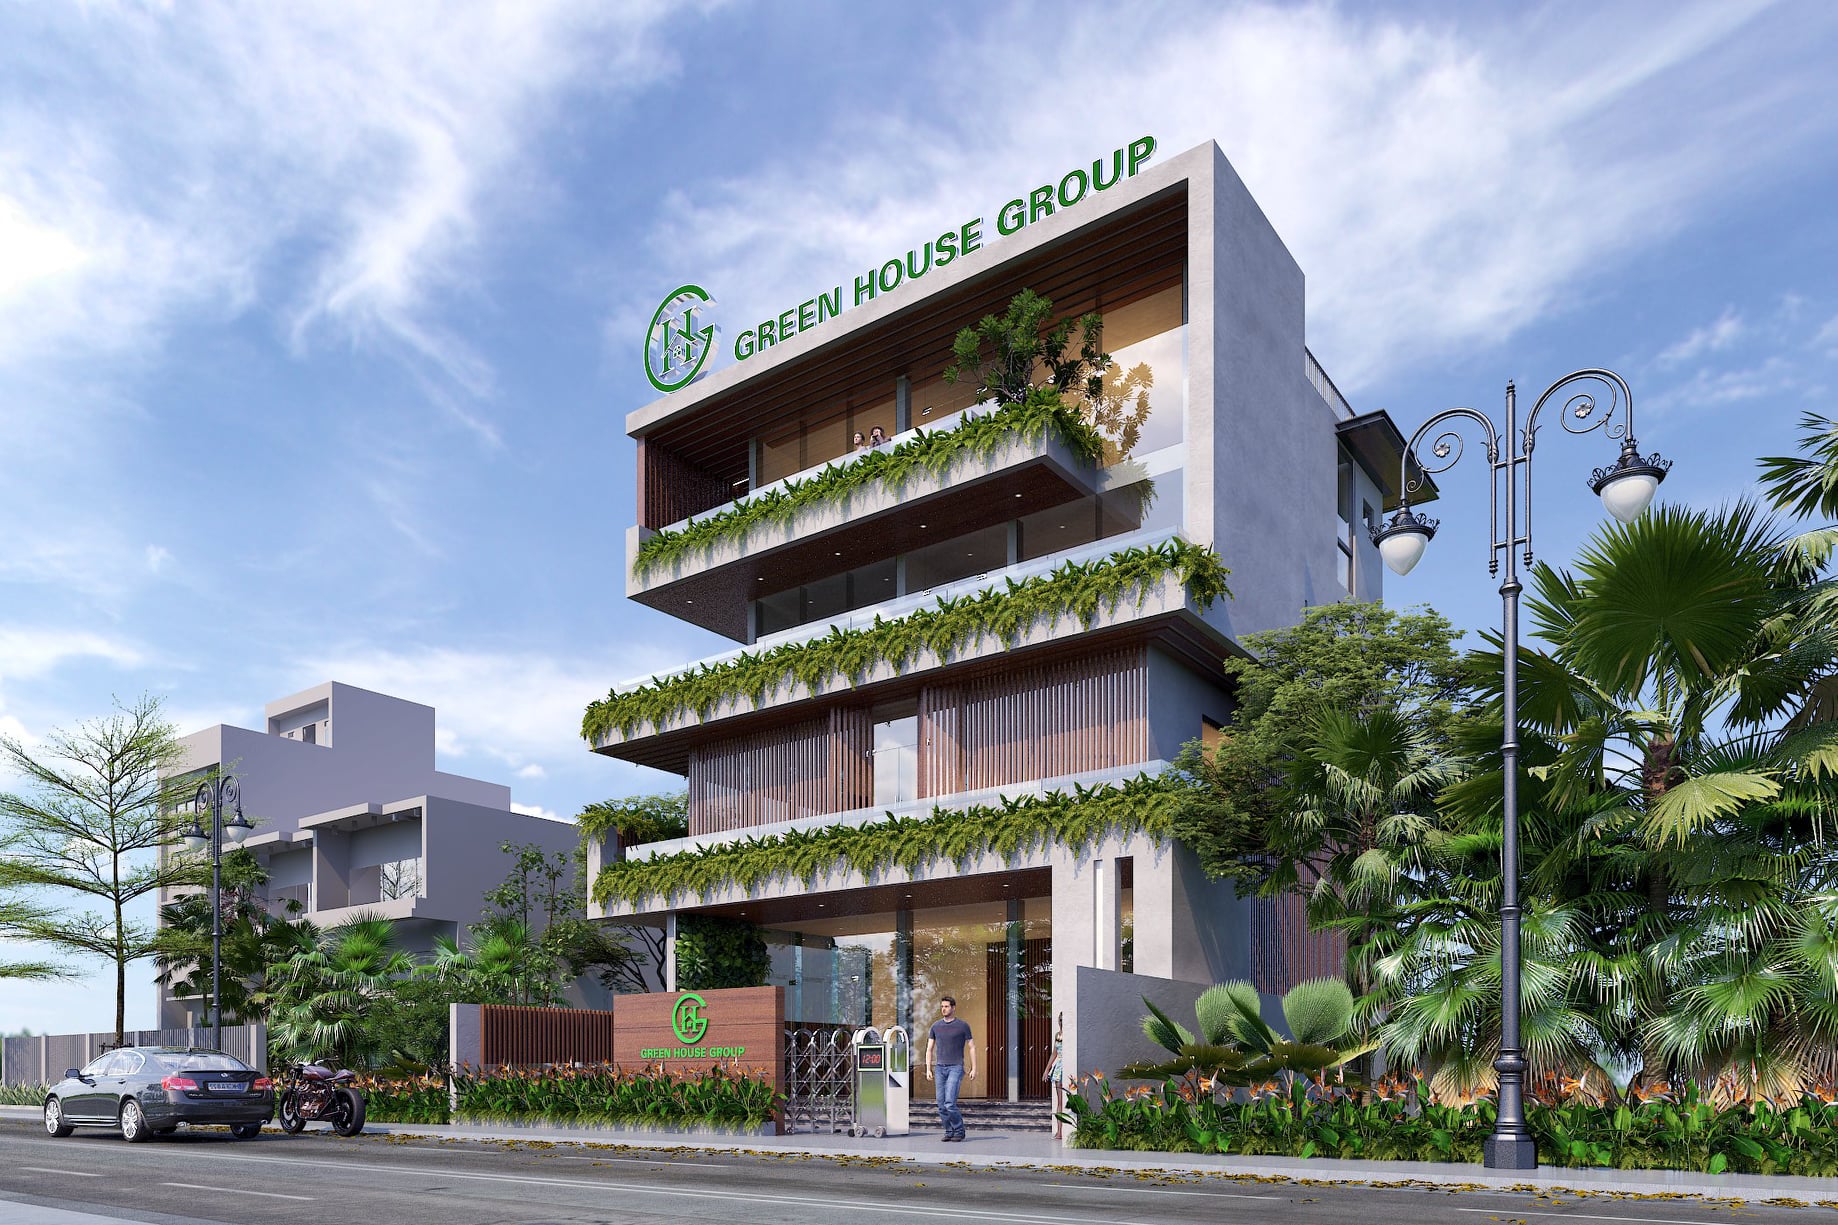 GREEN HOUSE GROUP